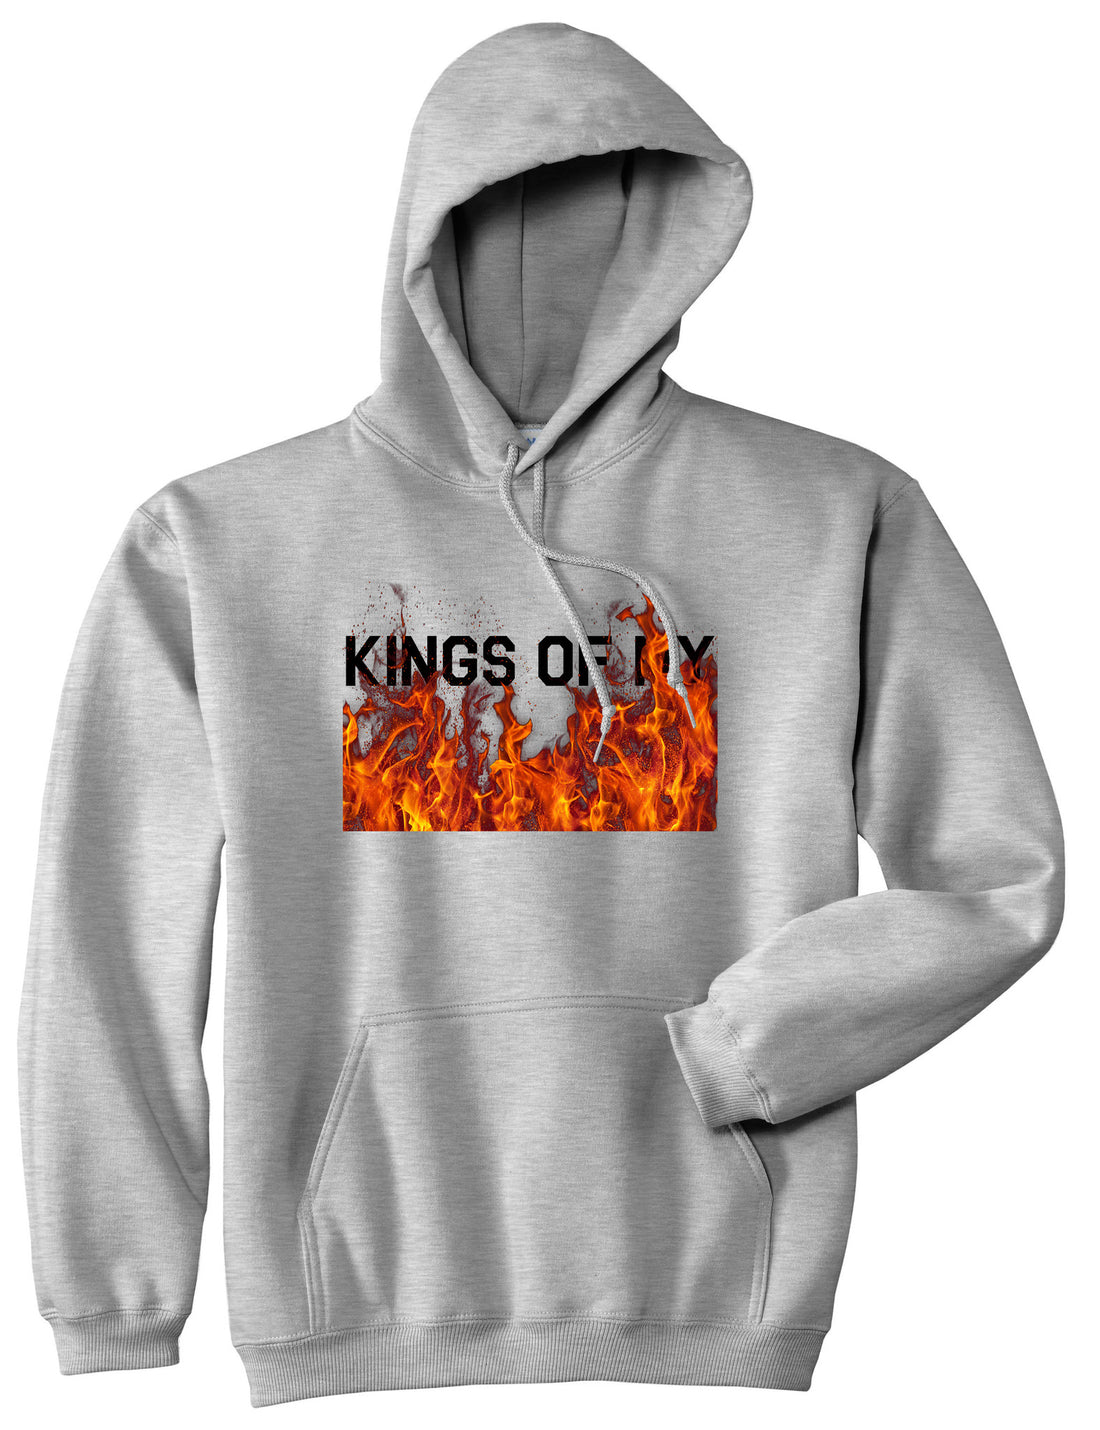 Rising From The Flames Pullover Hoodie in Grey